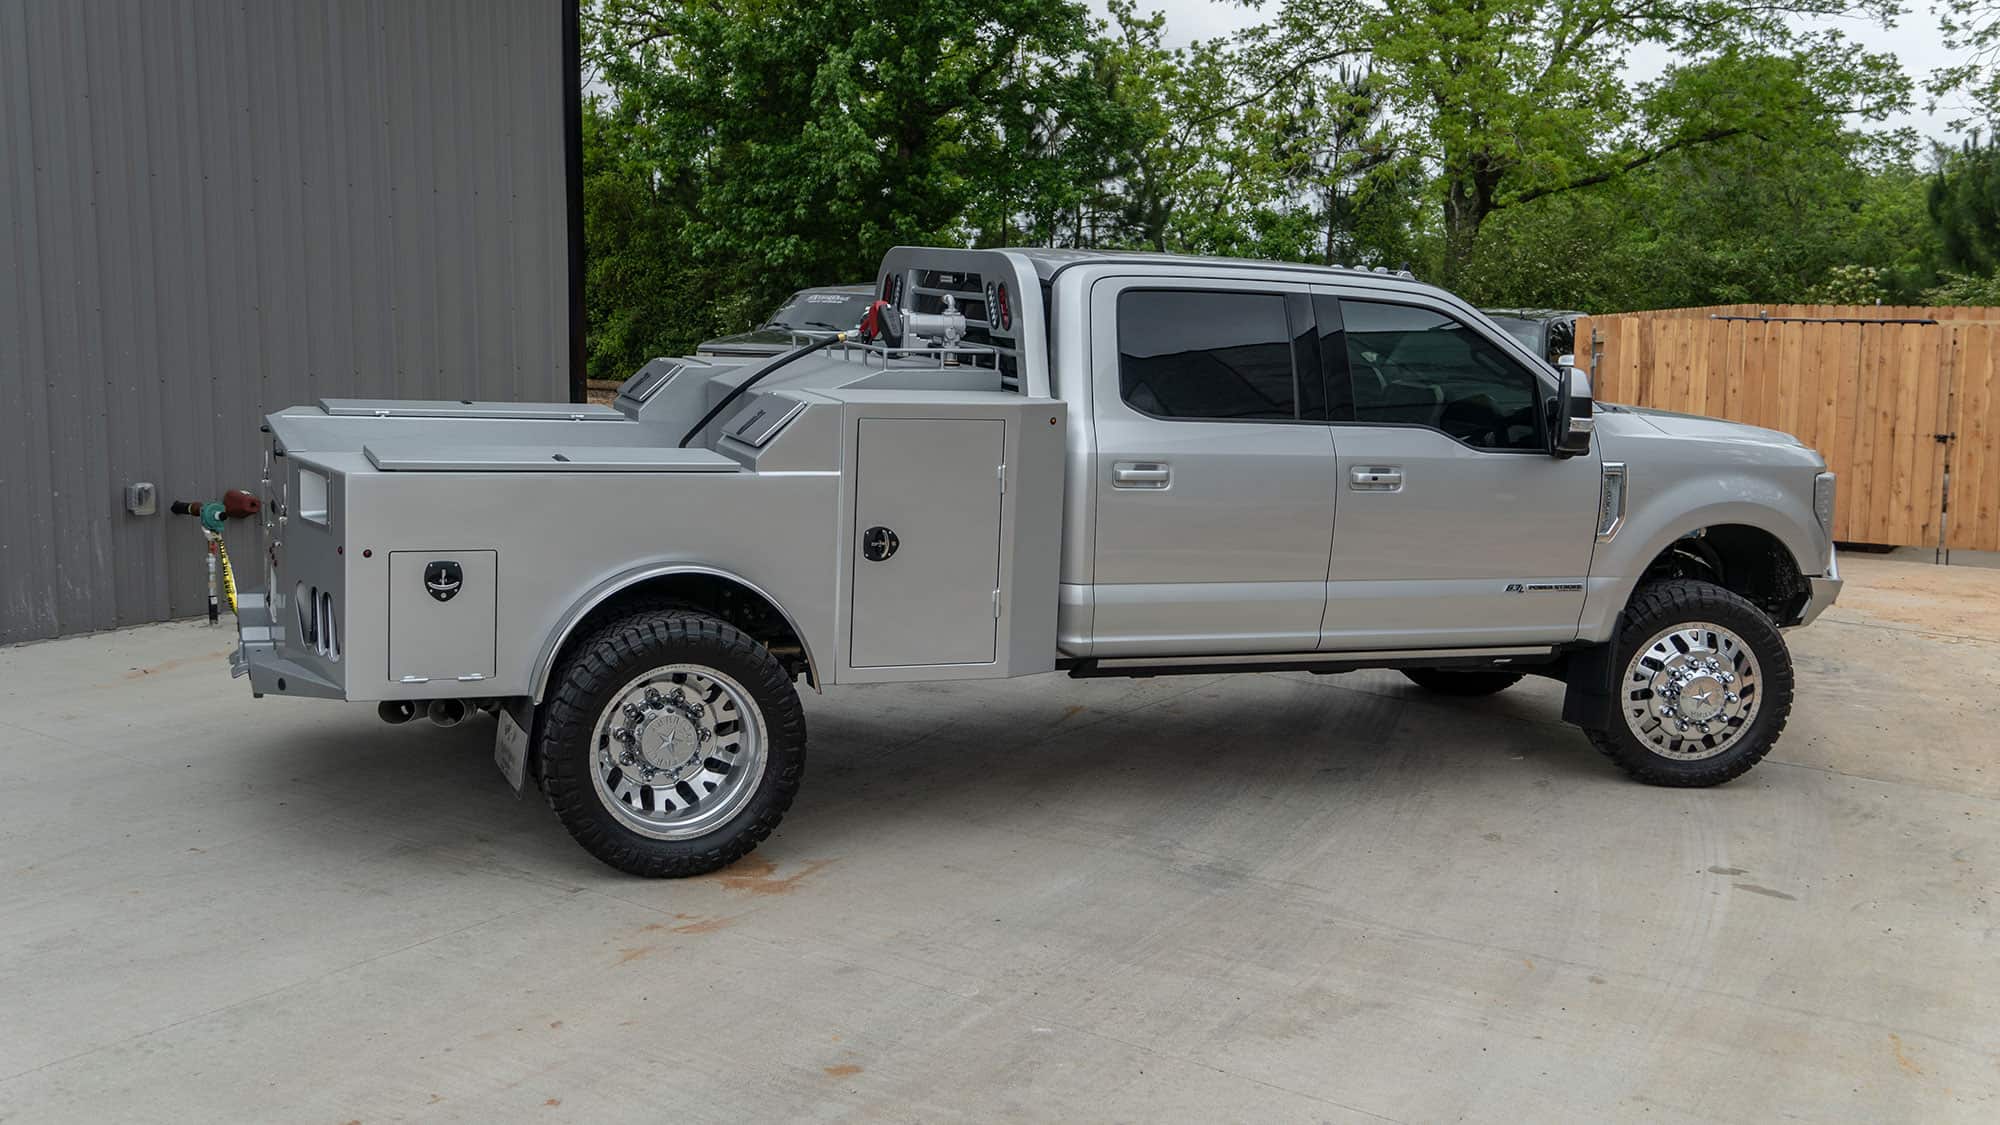 2018 F-350 Lariat - All Out Offroad